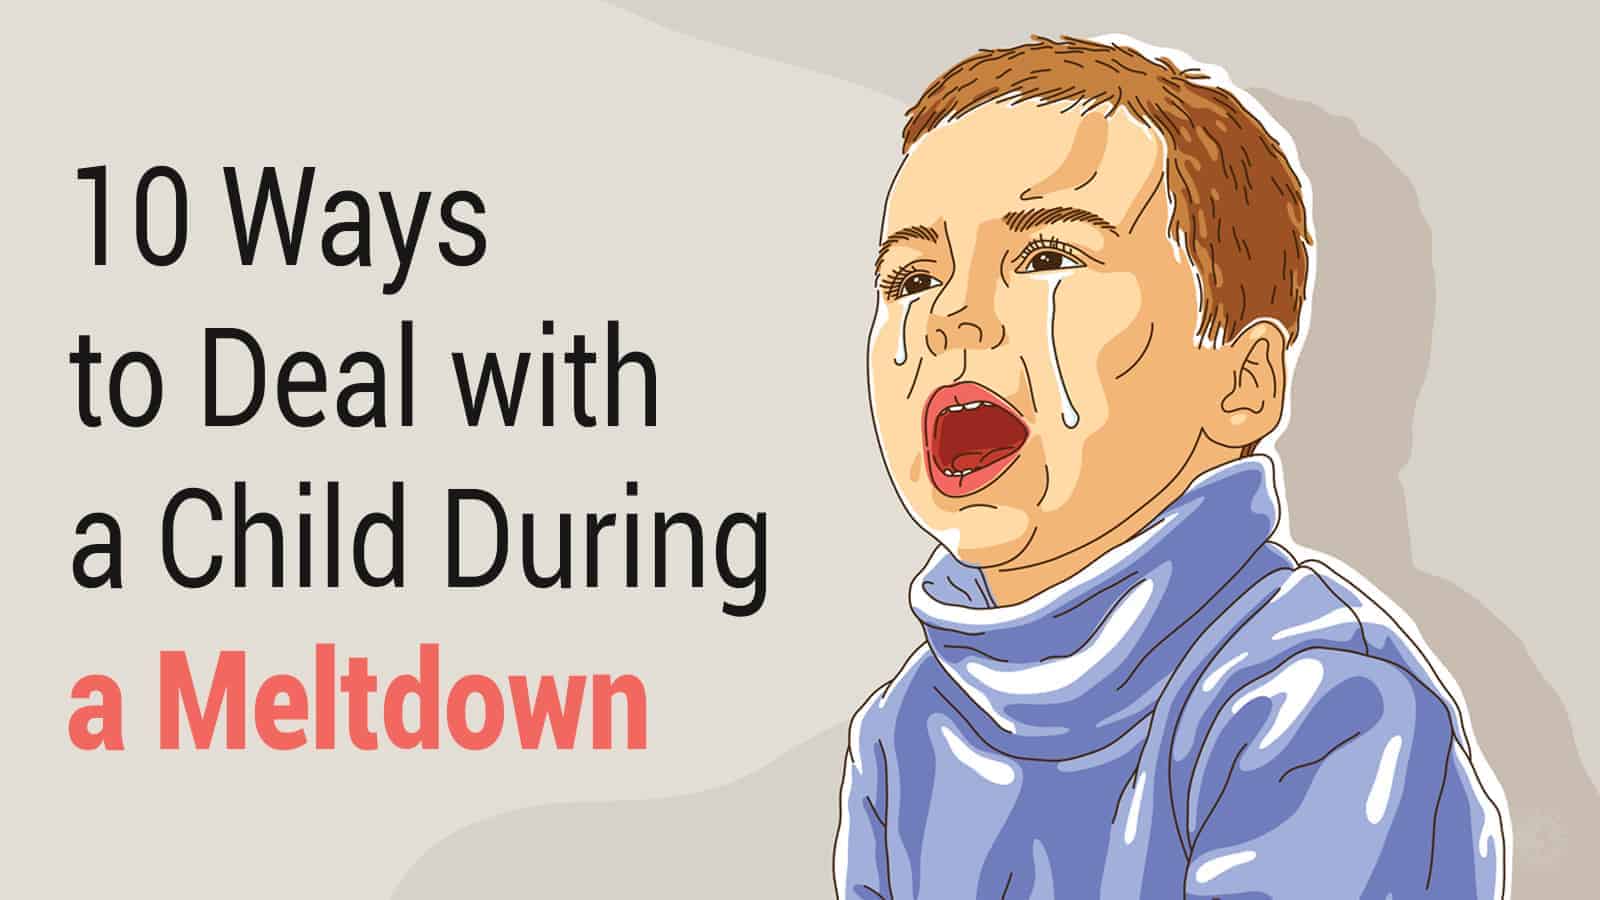 10 Ways to Deal with a Child During a Meltdown